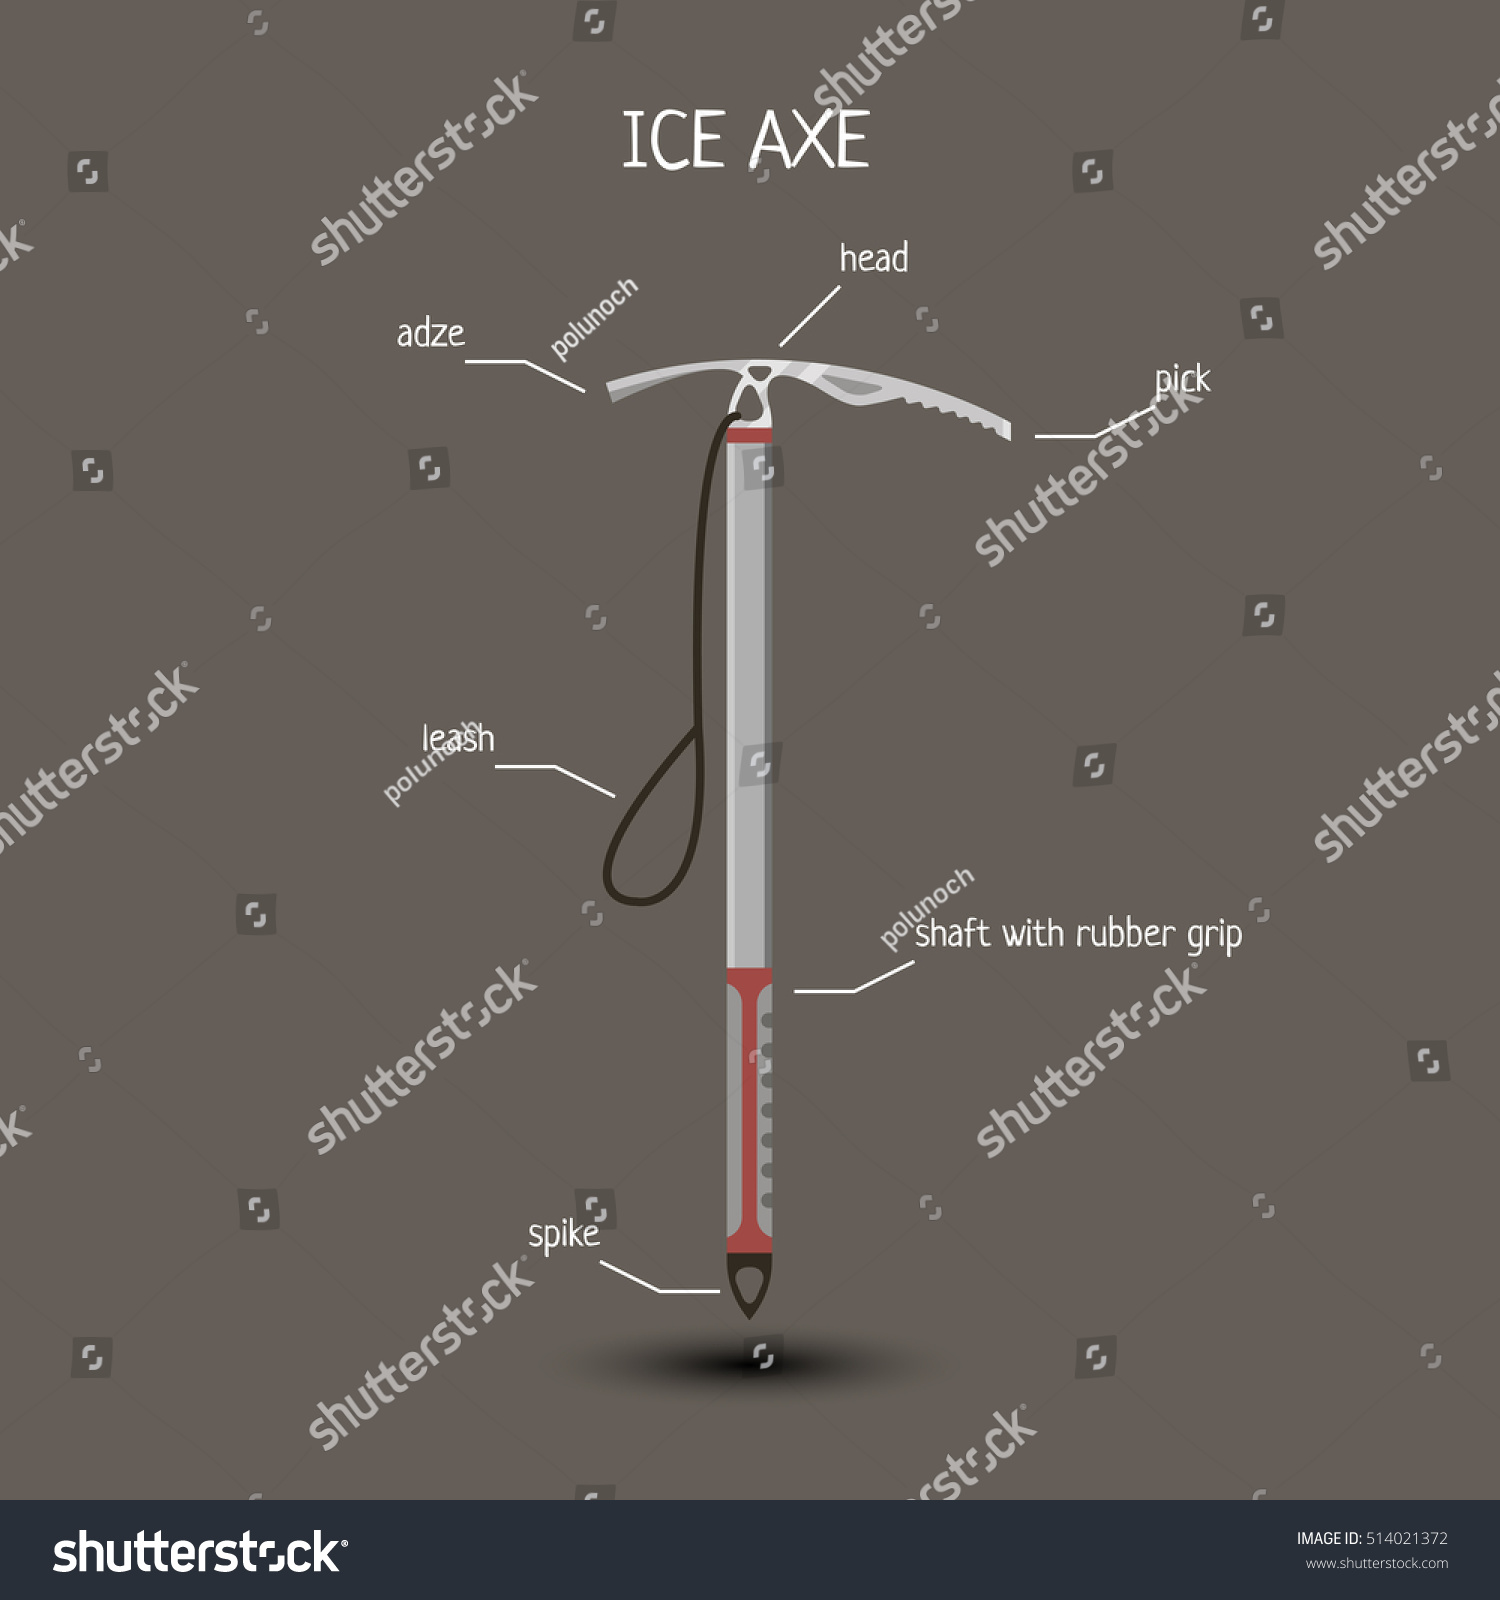 SVG of illustration of mountain equipment: ice axe for climbing and mountaineering - components: pick, head, adze, leash, shaft with rubber grip, spike. flat style. eps-10 svg